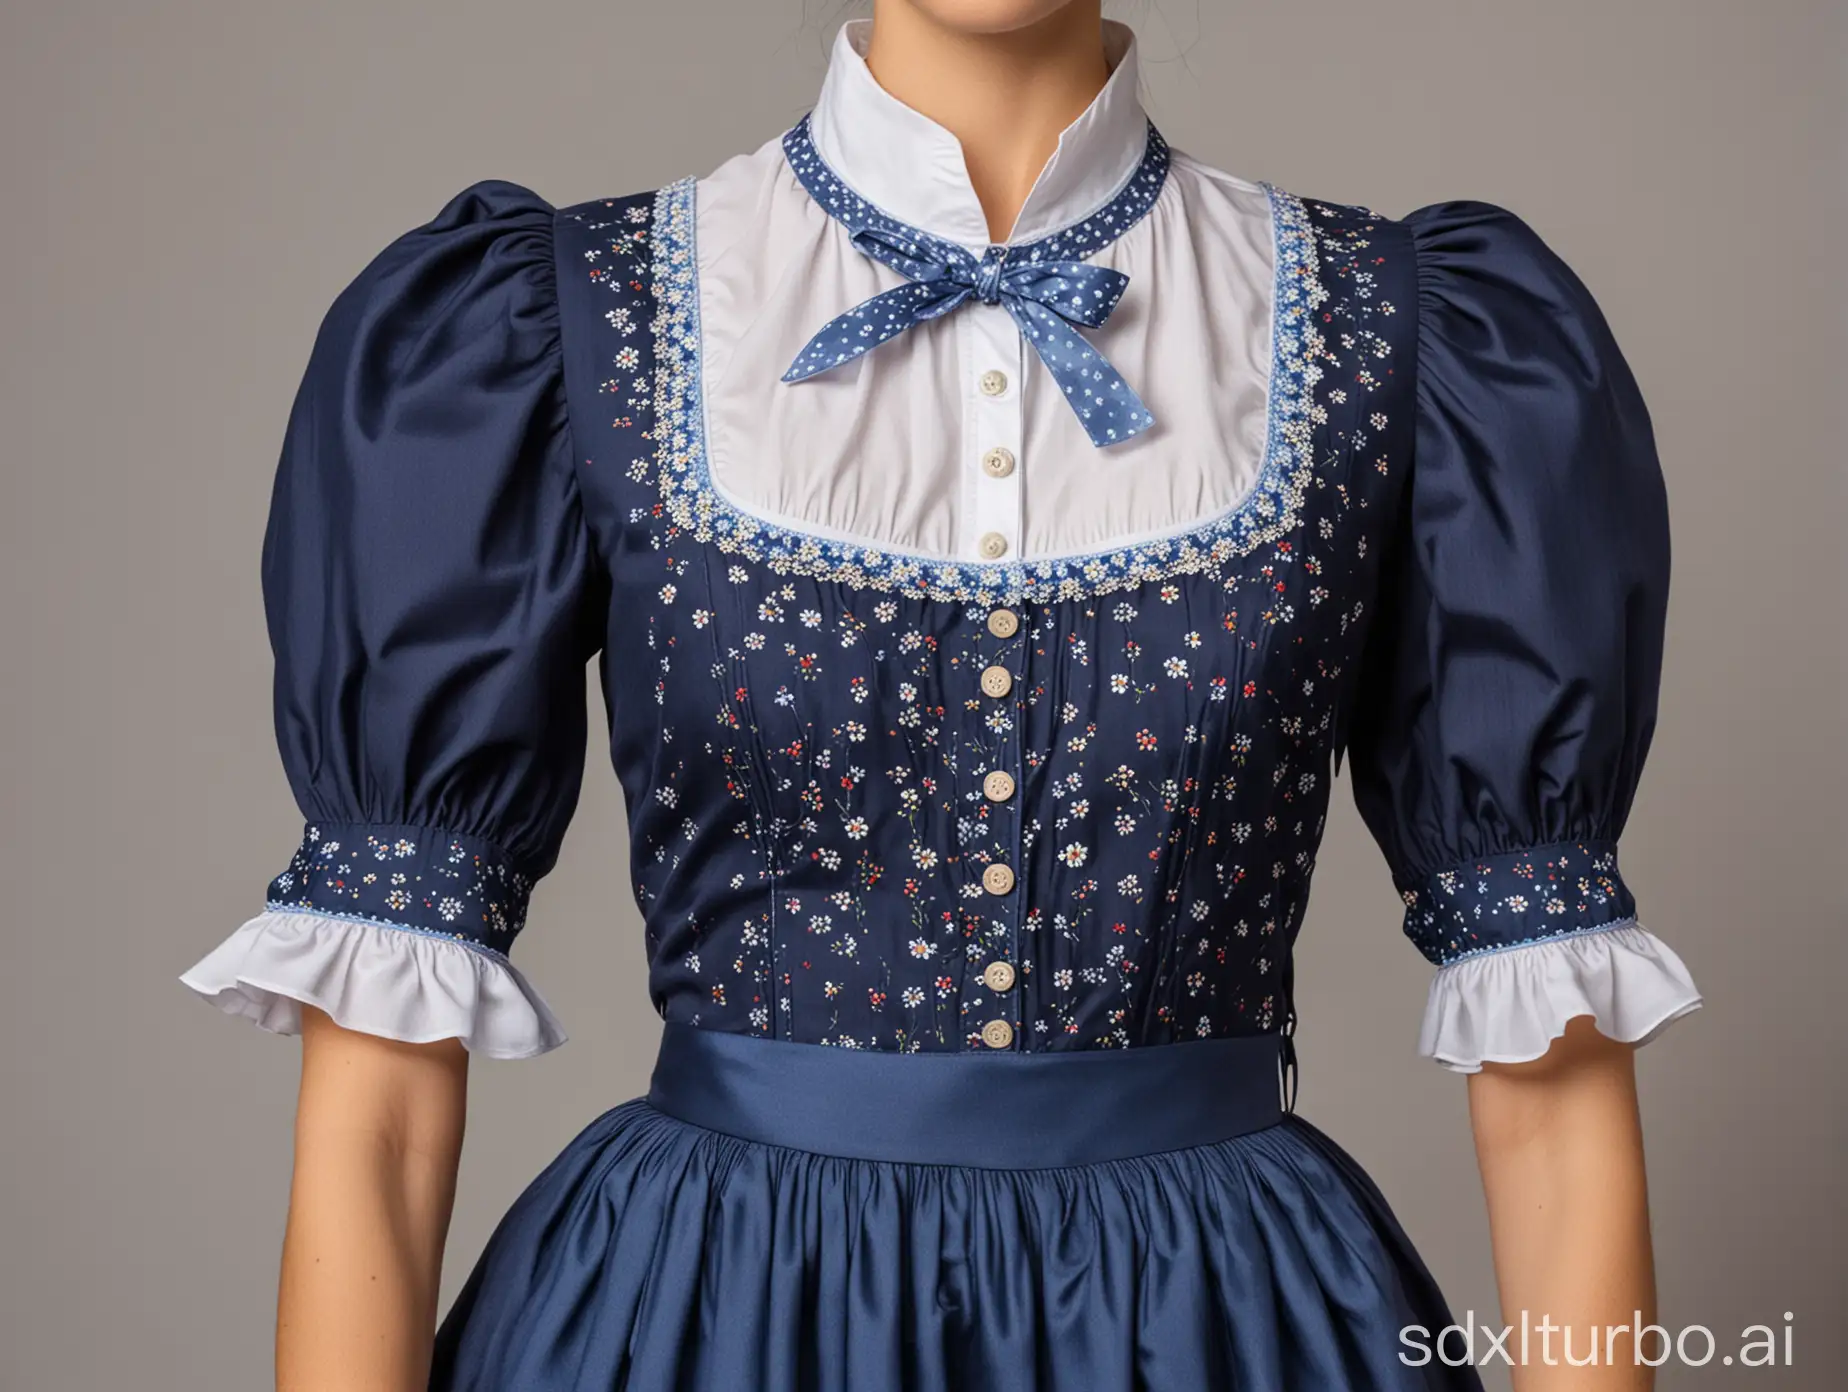 Midi-Dirndl, dark blue with small scattered flowers, light blue apron, puff sleeve blouse, 12 silver, round buttons in front.